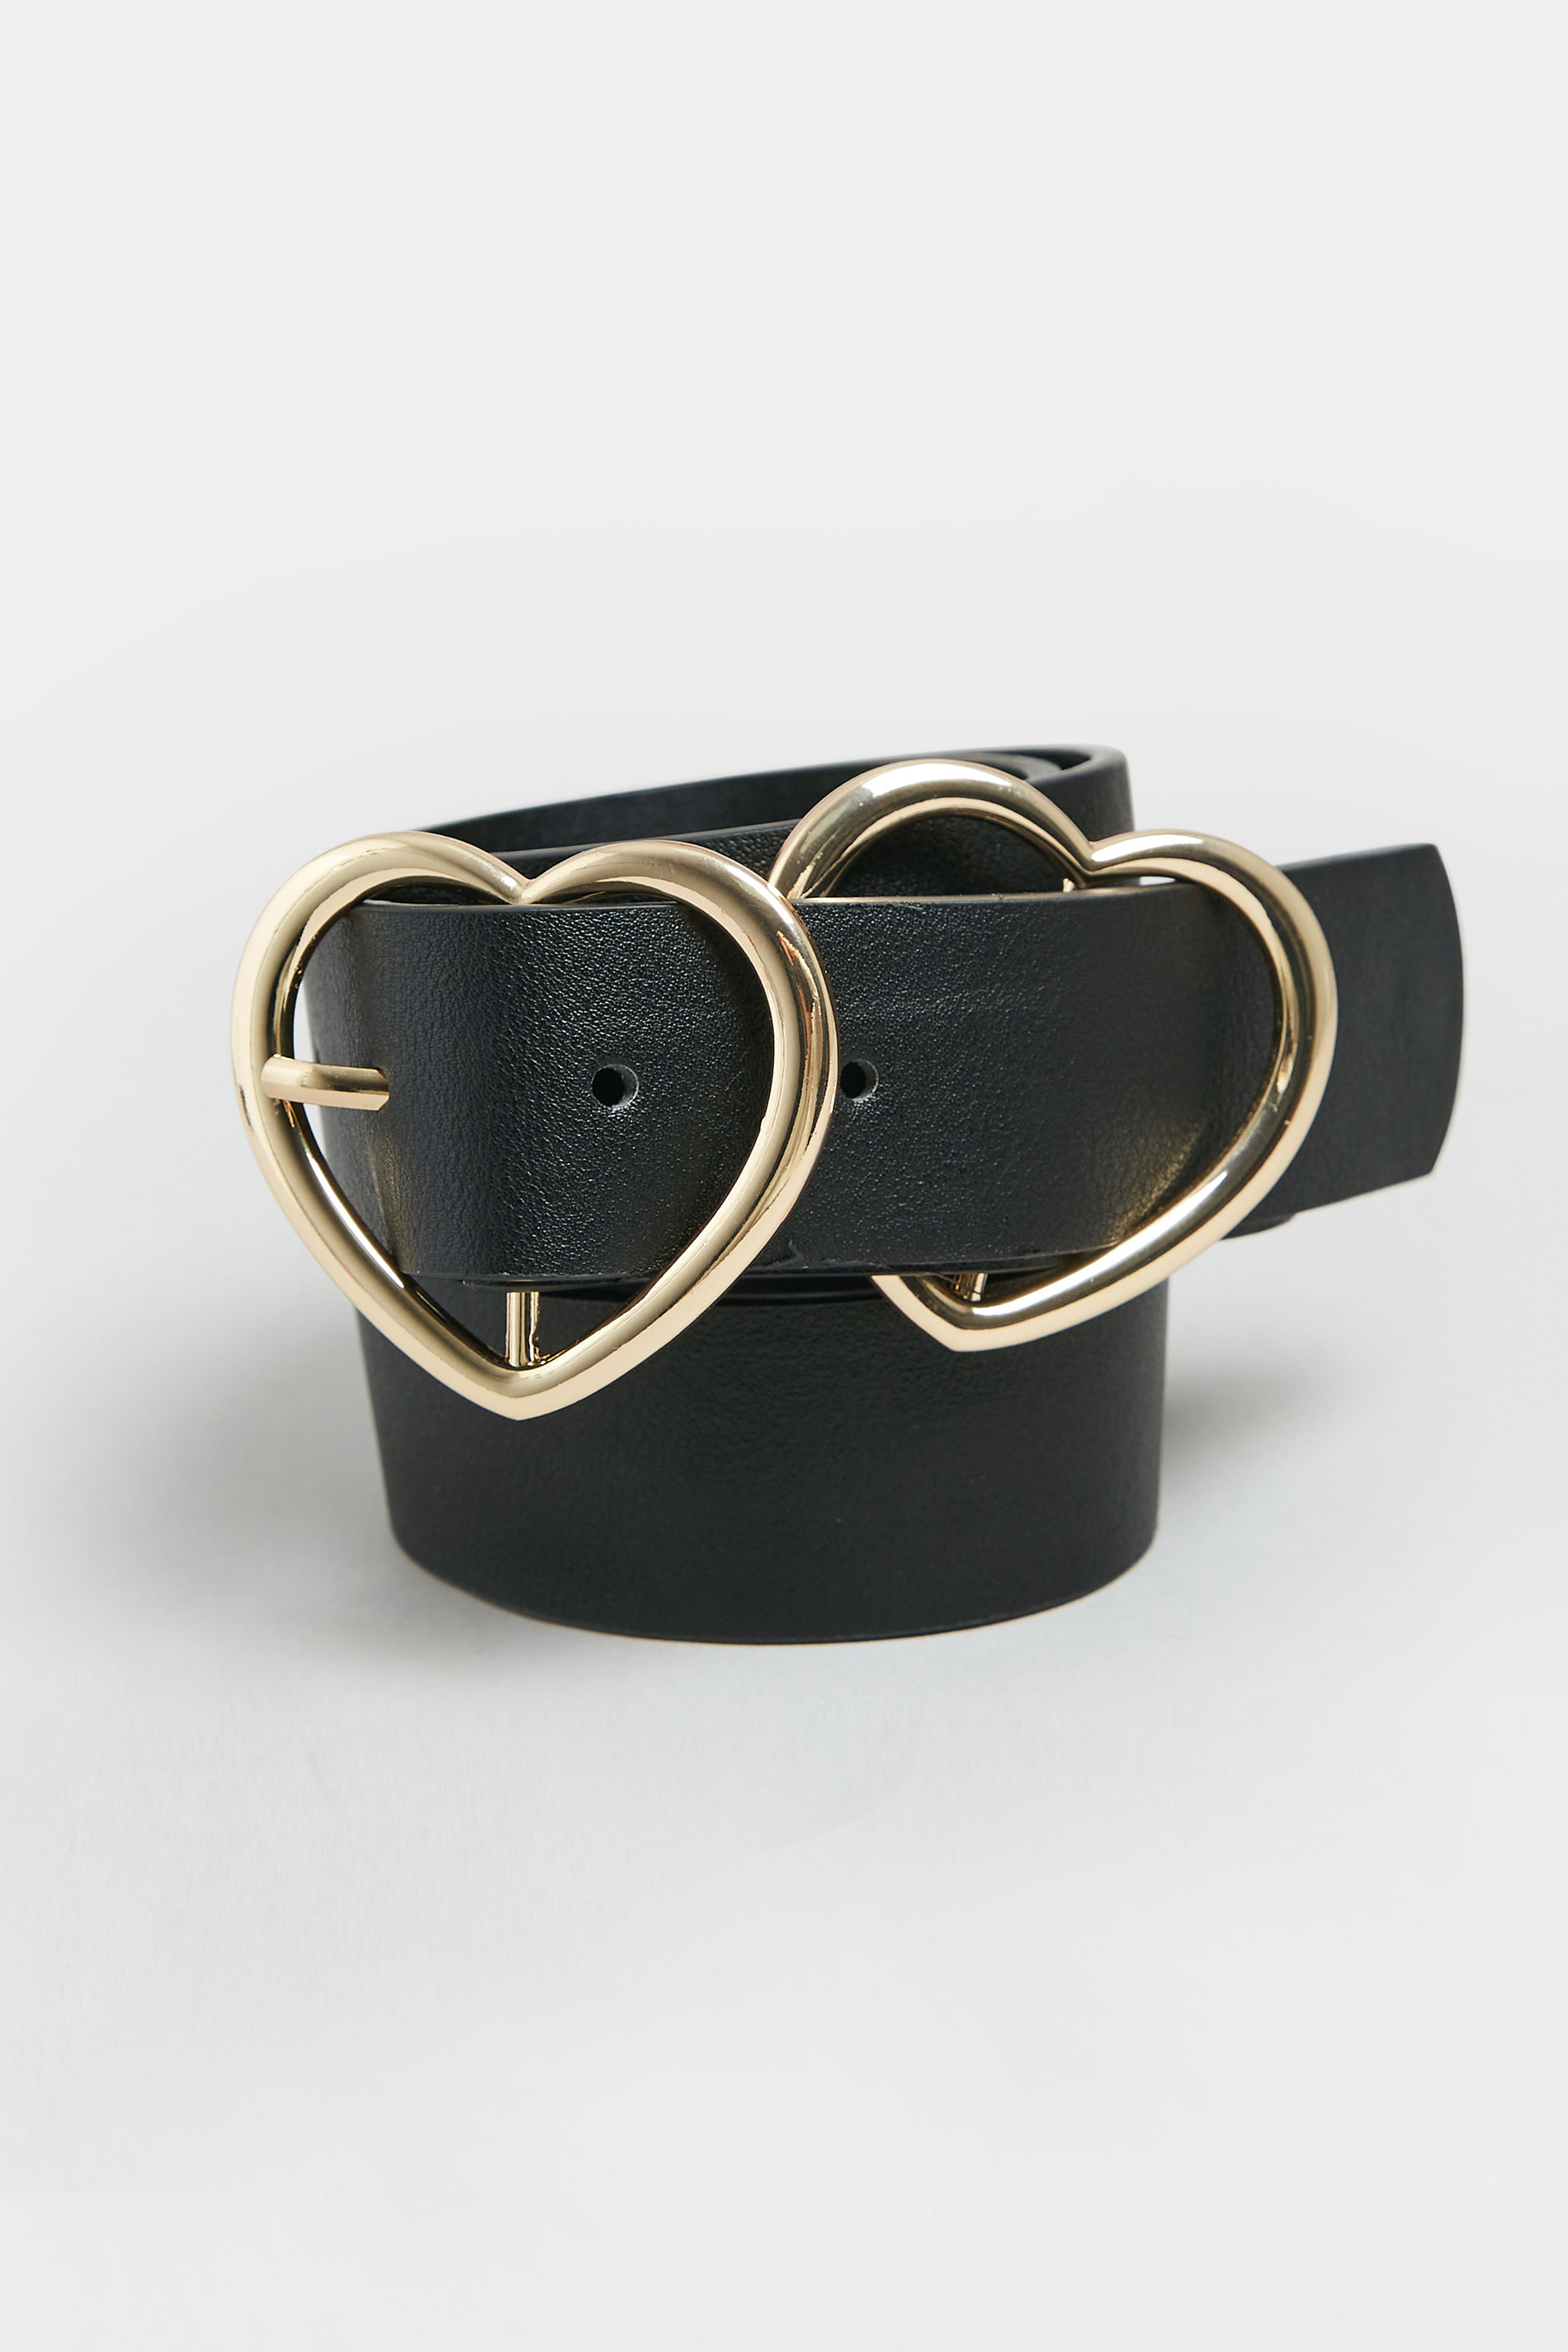 Black & Gold Double Heart Belt | Yours Clothing 2